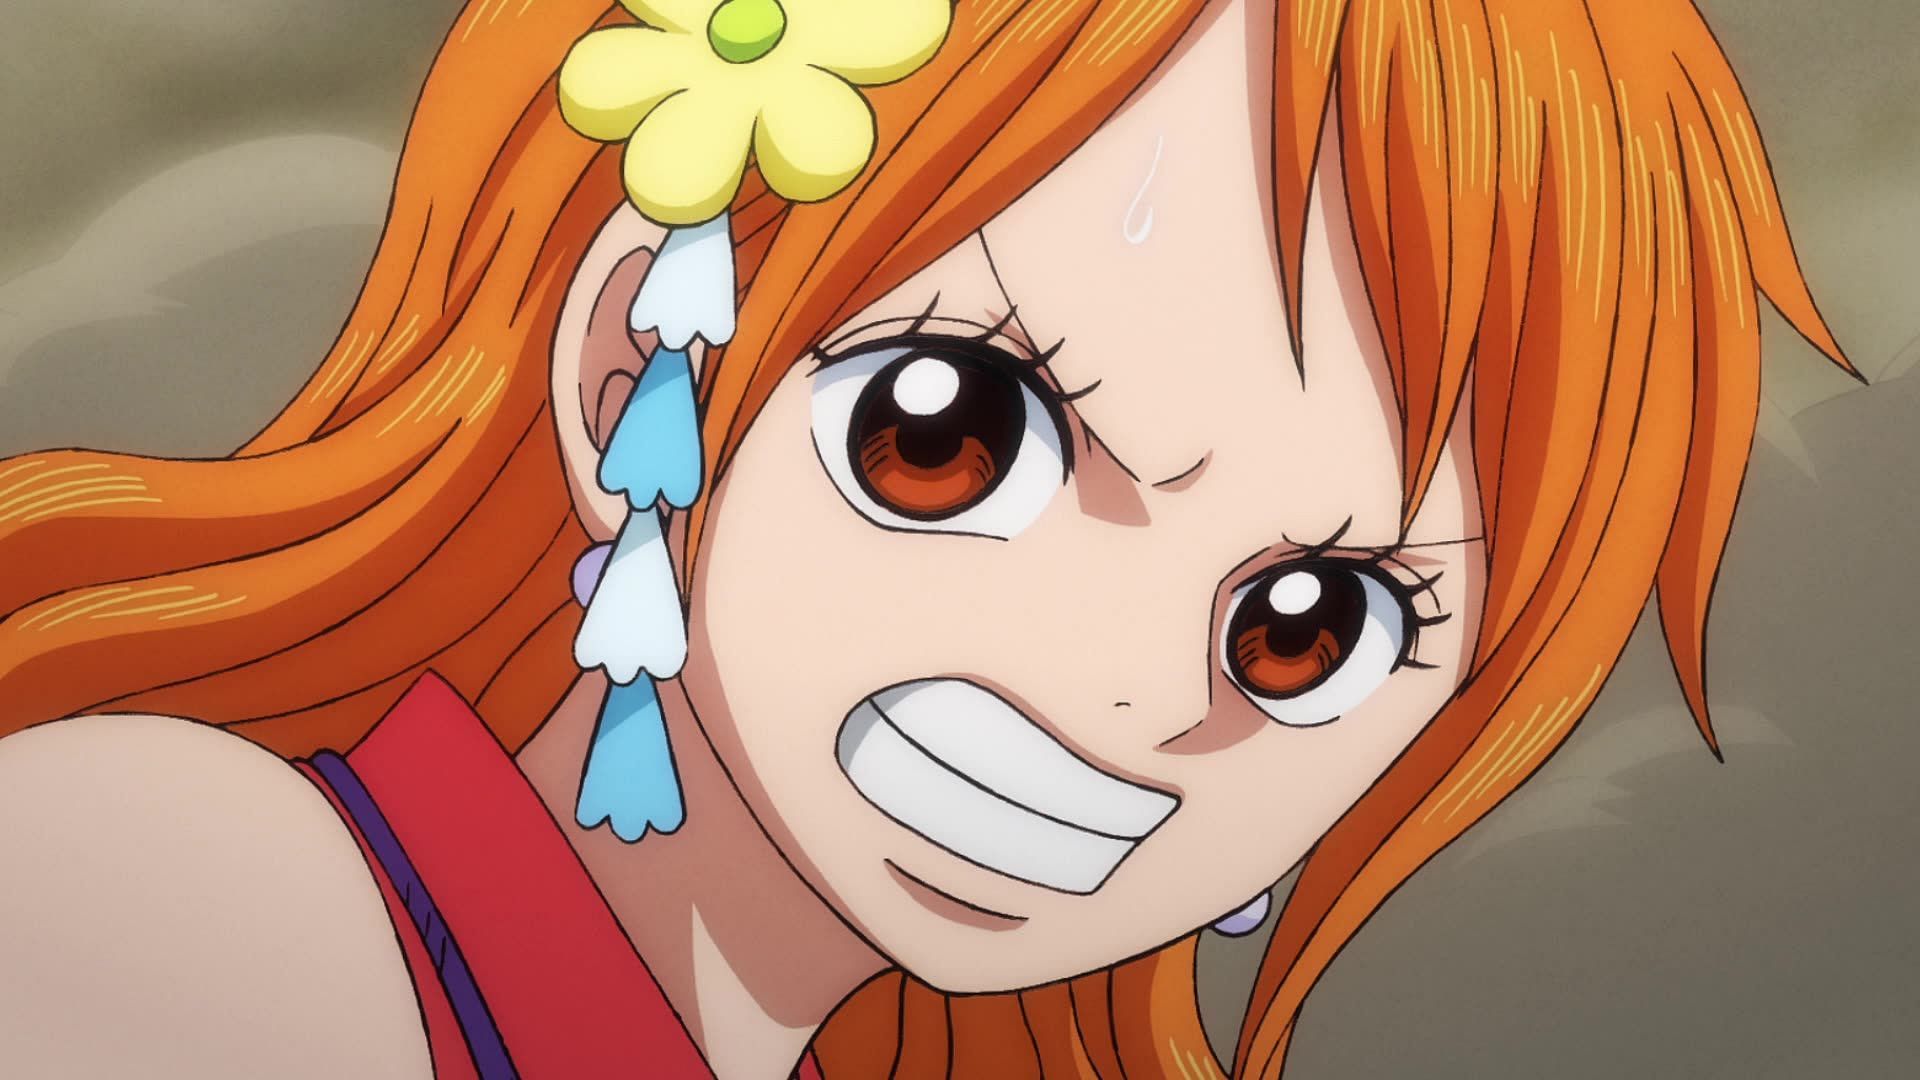 Nami as seen in the show (Image via Toei Animation)